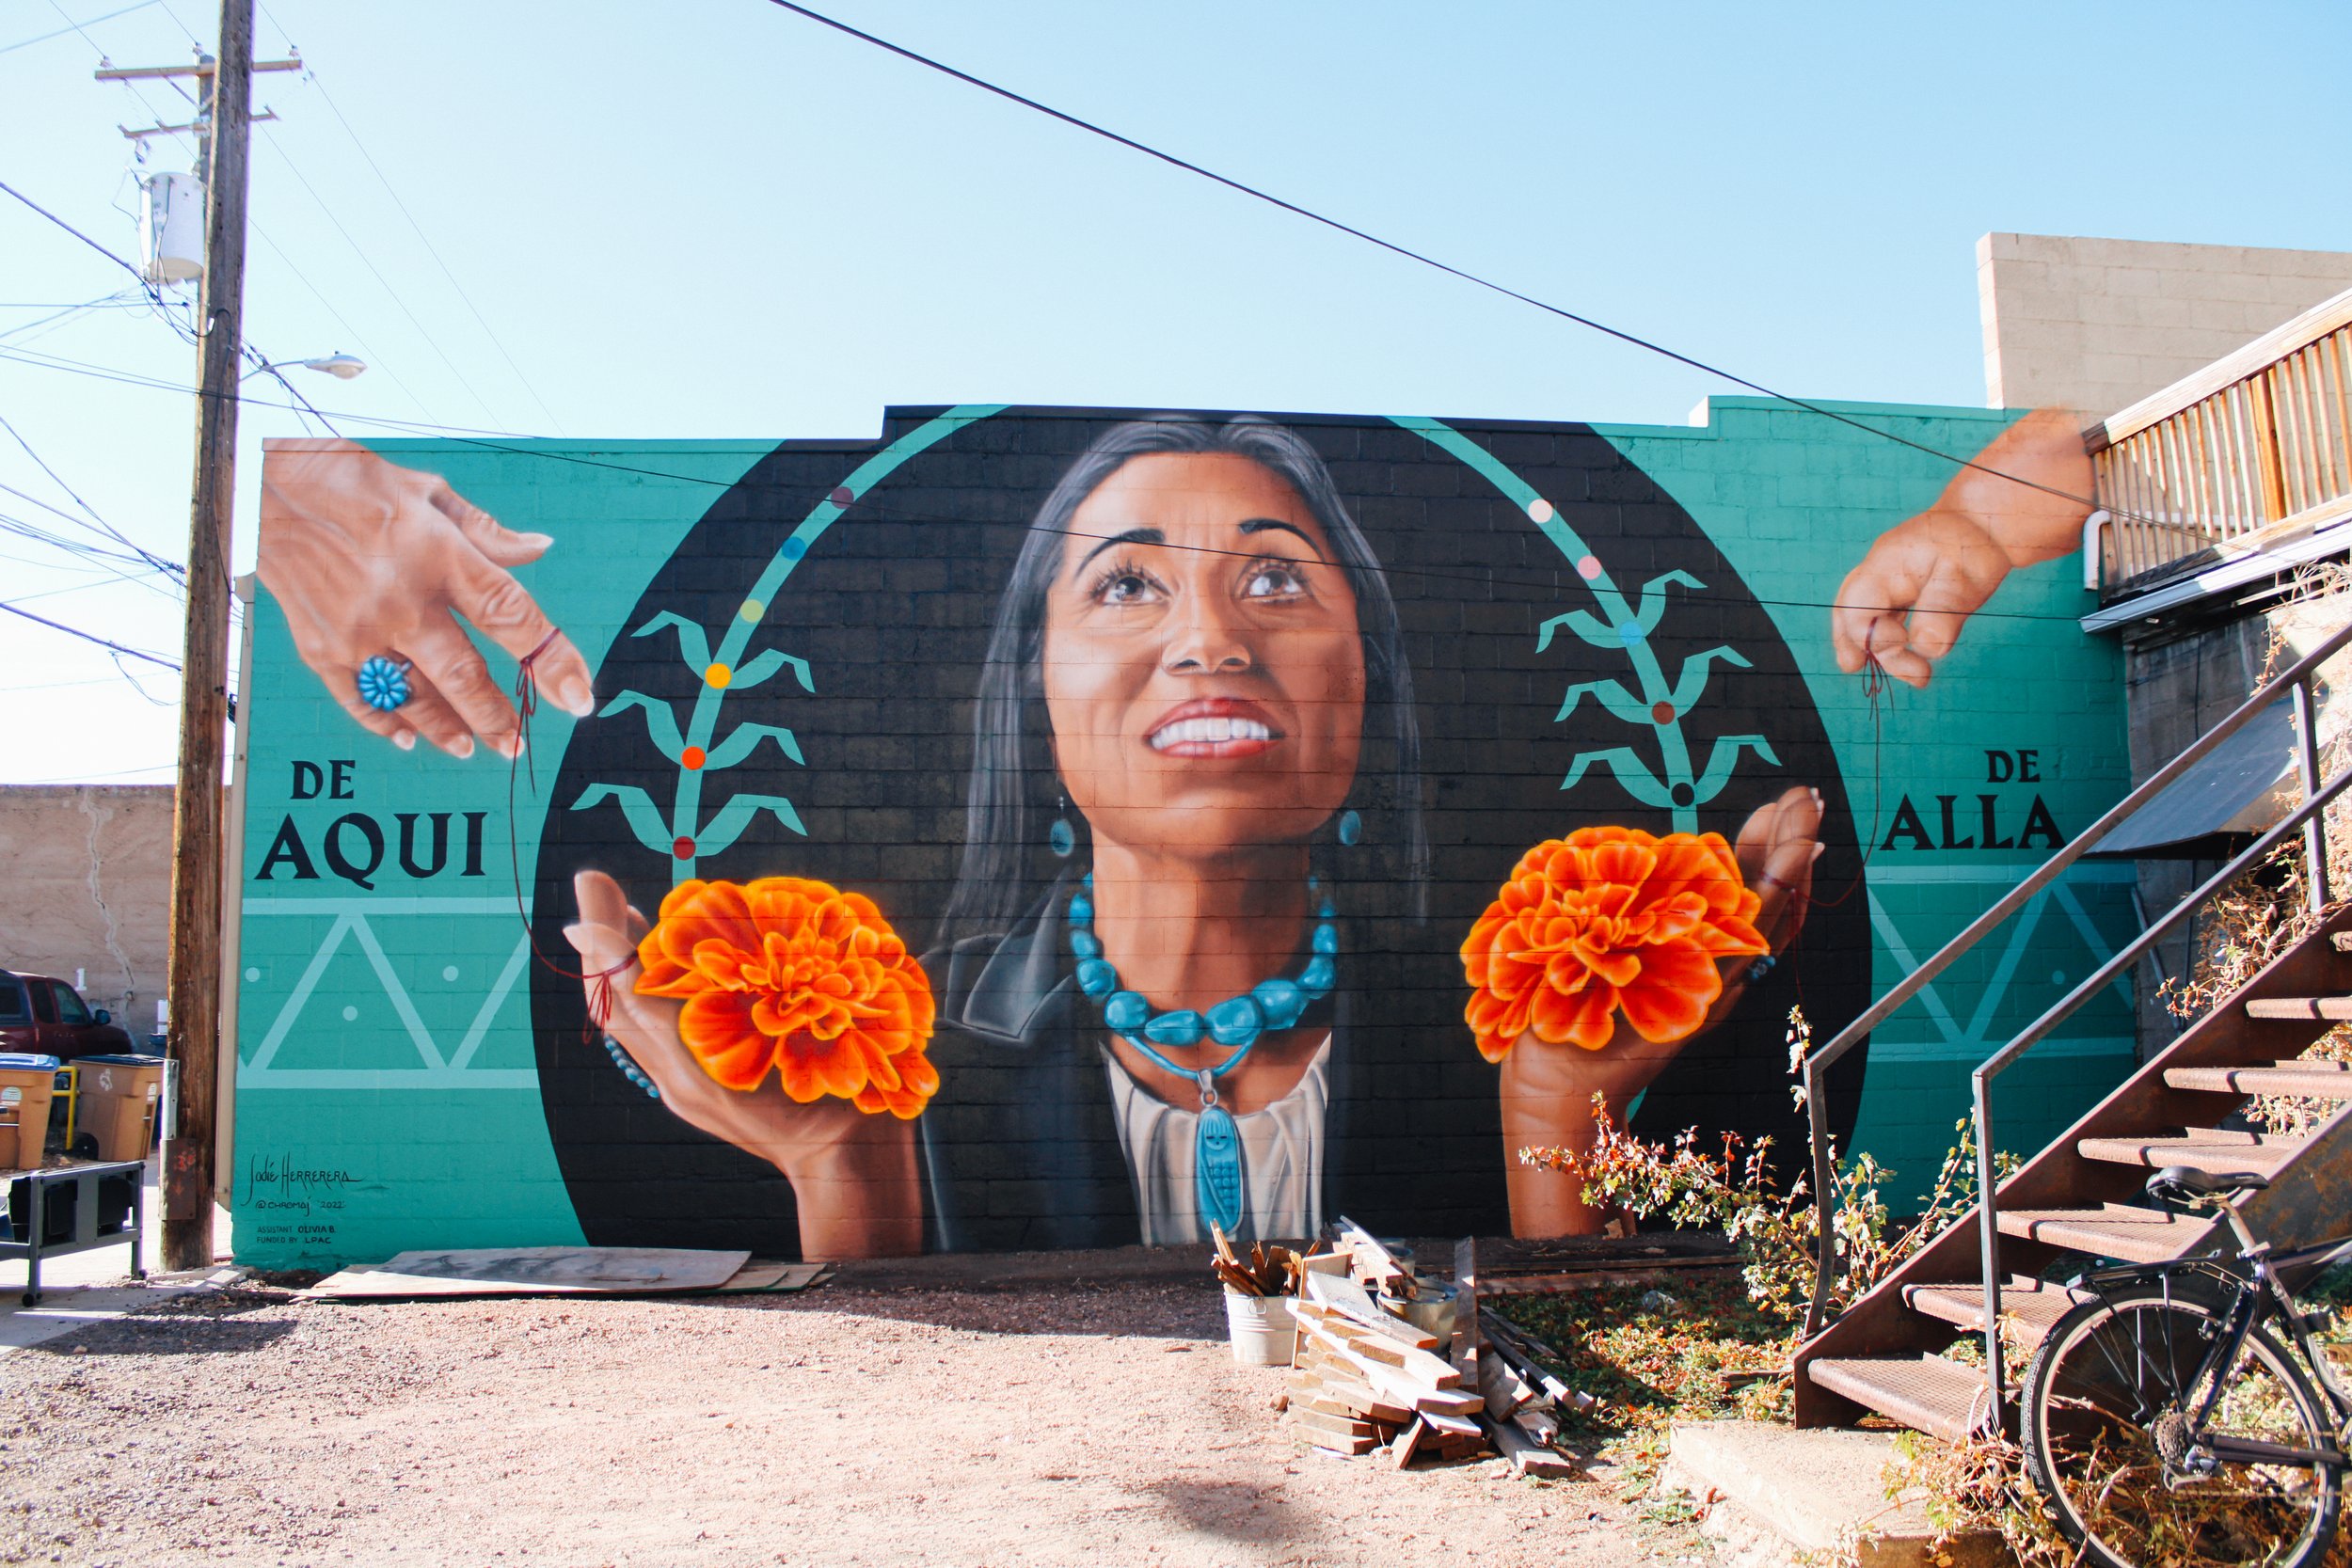  The completed mural. Image by Luna Photography, 